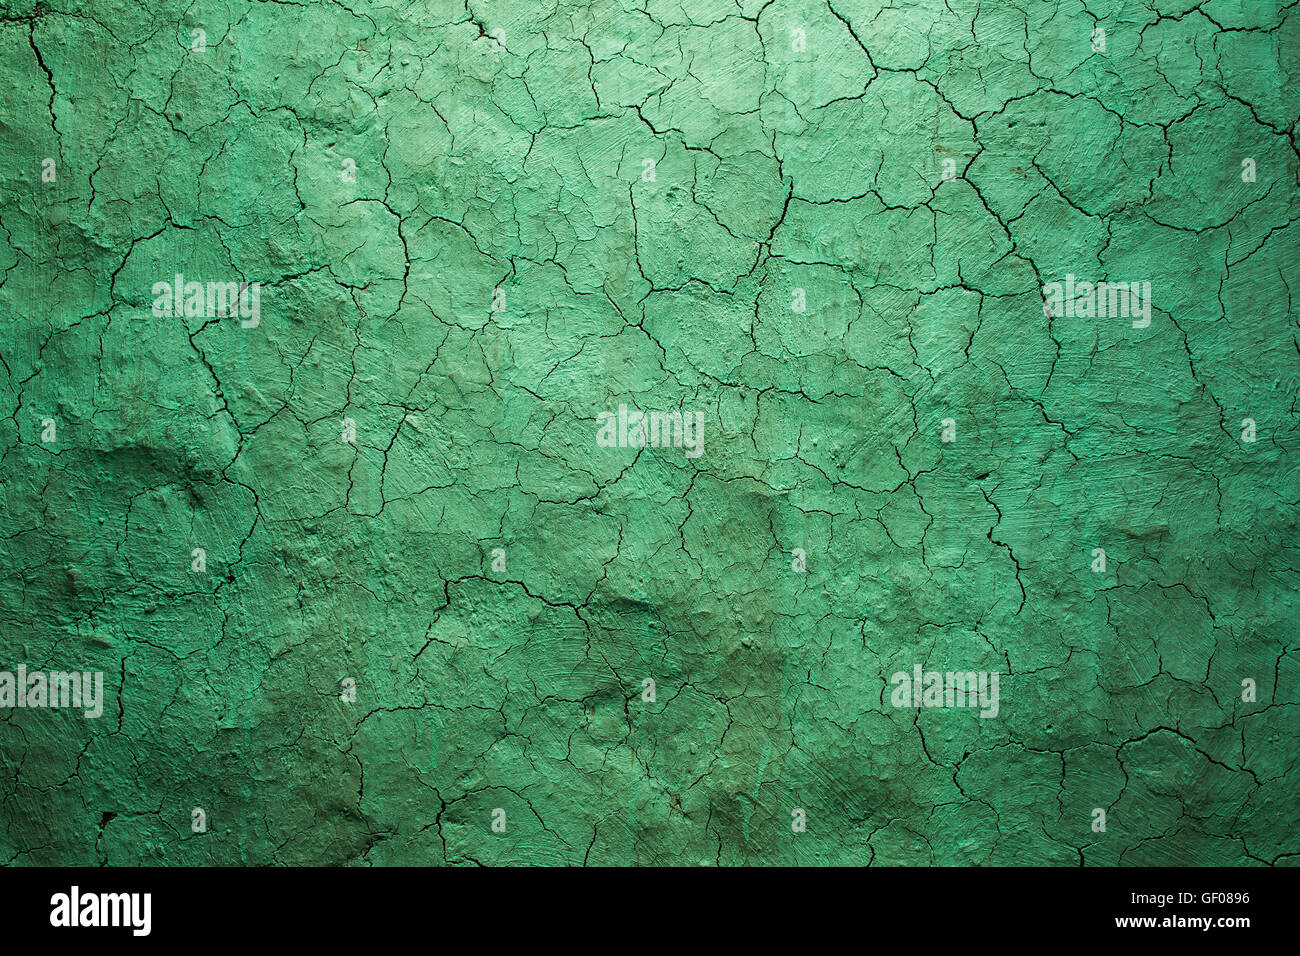 Old texture green cracked wall, the old paint texture is chipping and cracked fall destruction. Grunge wall texture for design. Stock Photo